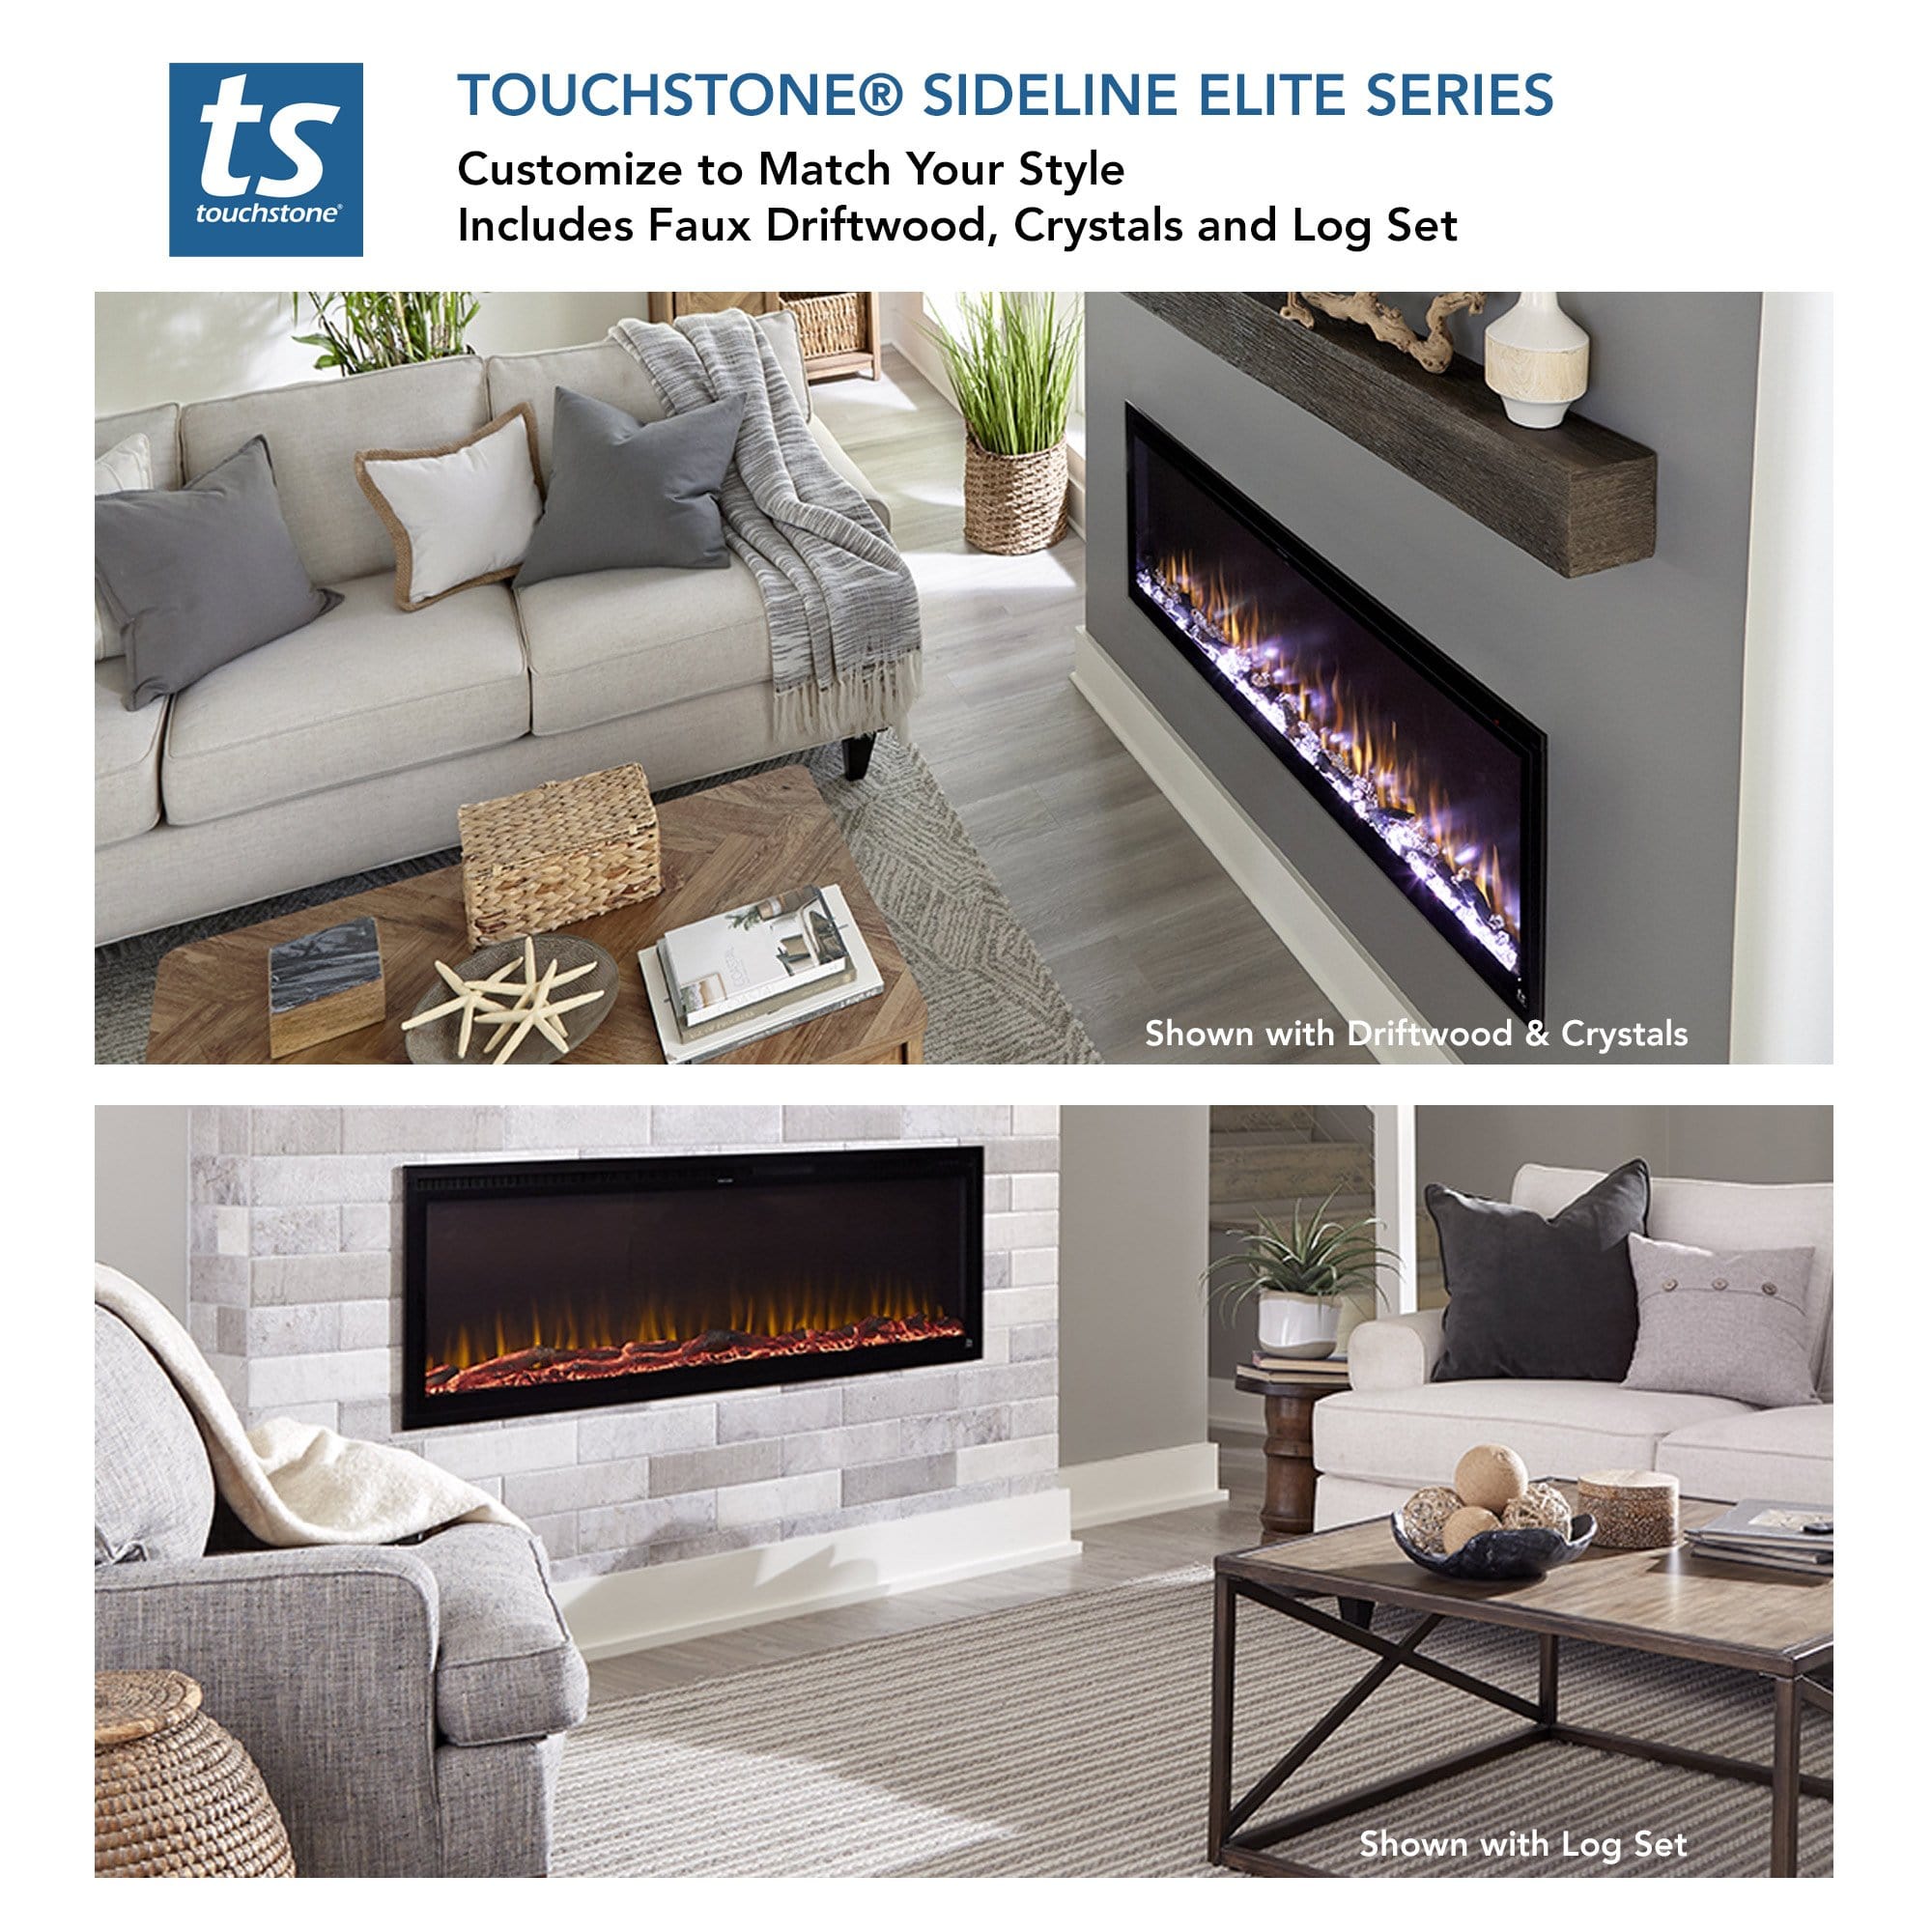 Customize the Touchstone Sideline Elite Electric Fireplace to match your style with driftwood, crystals or logs